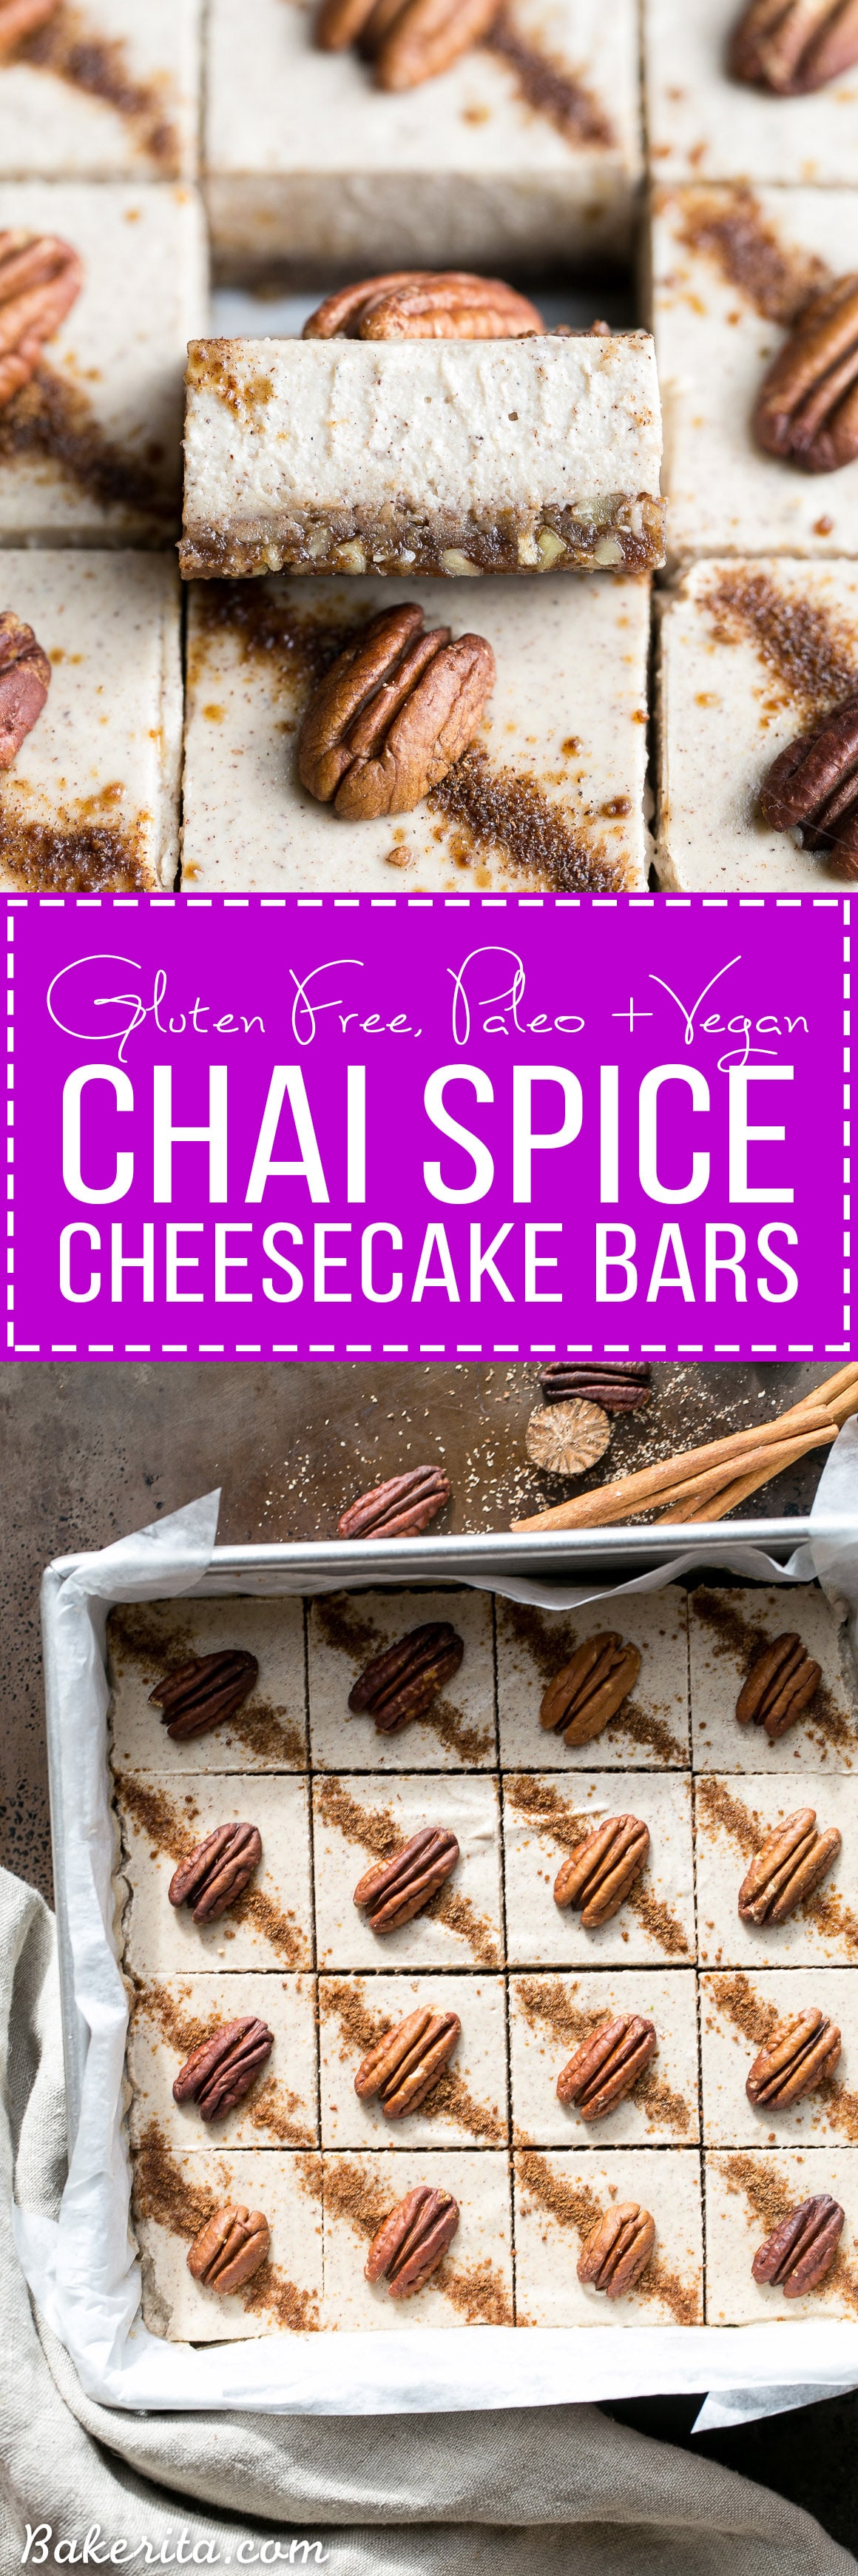 These Chai Cheesecake Bars are tangy and full of spicy chai flavor - they have a vegan cashew cheesecake filling and a pecan date crust. These creamy cheesecake bars are gluten-free, paleo, vegan, and there's no baking required!